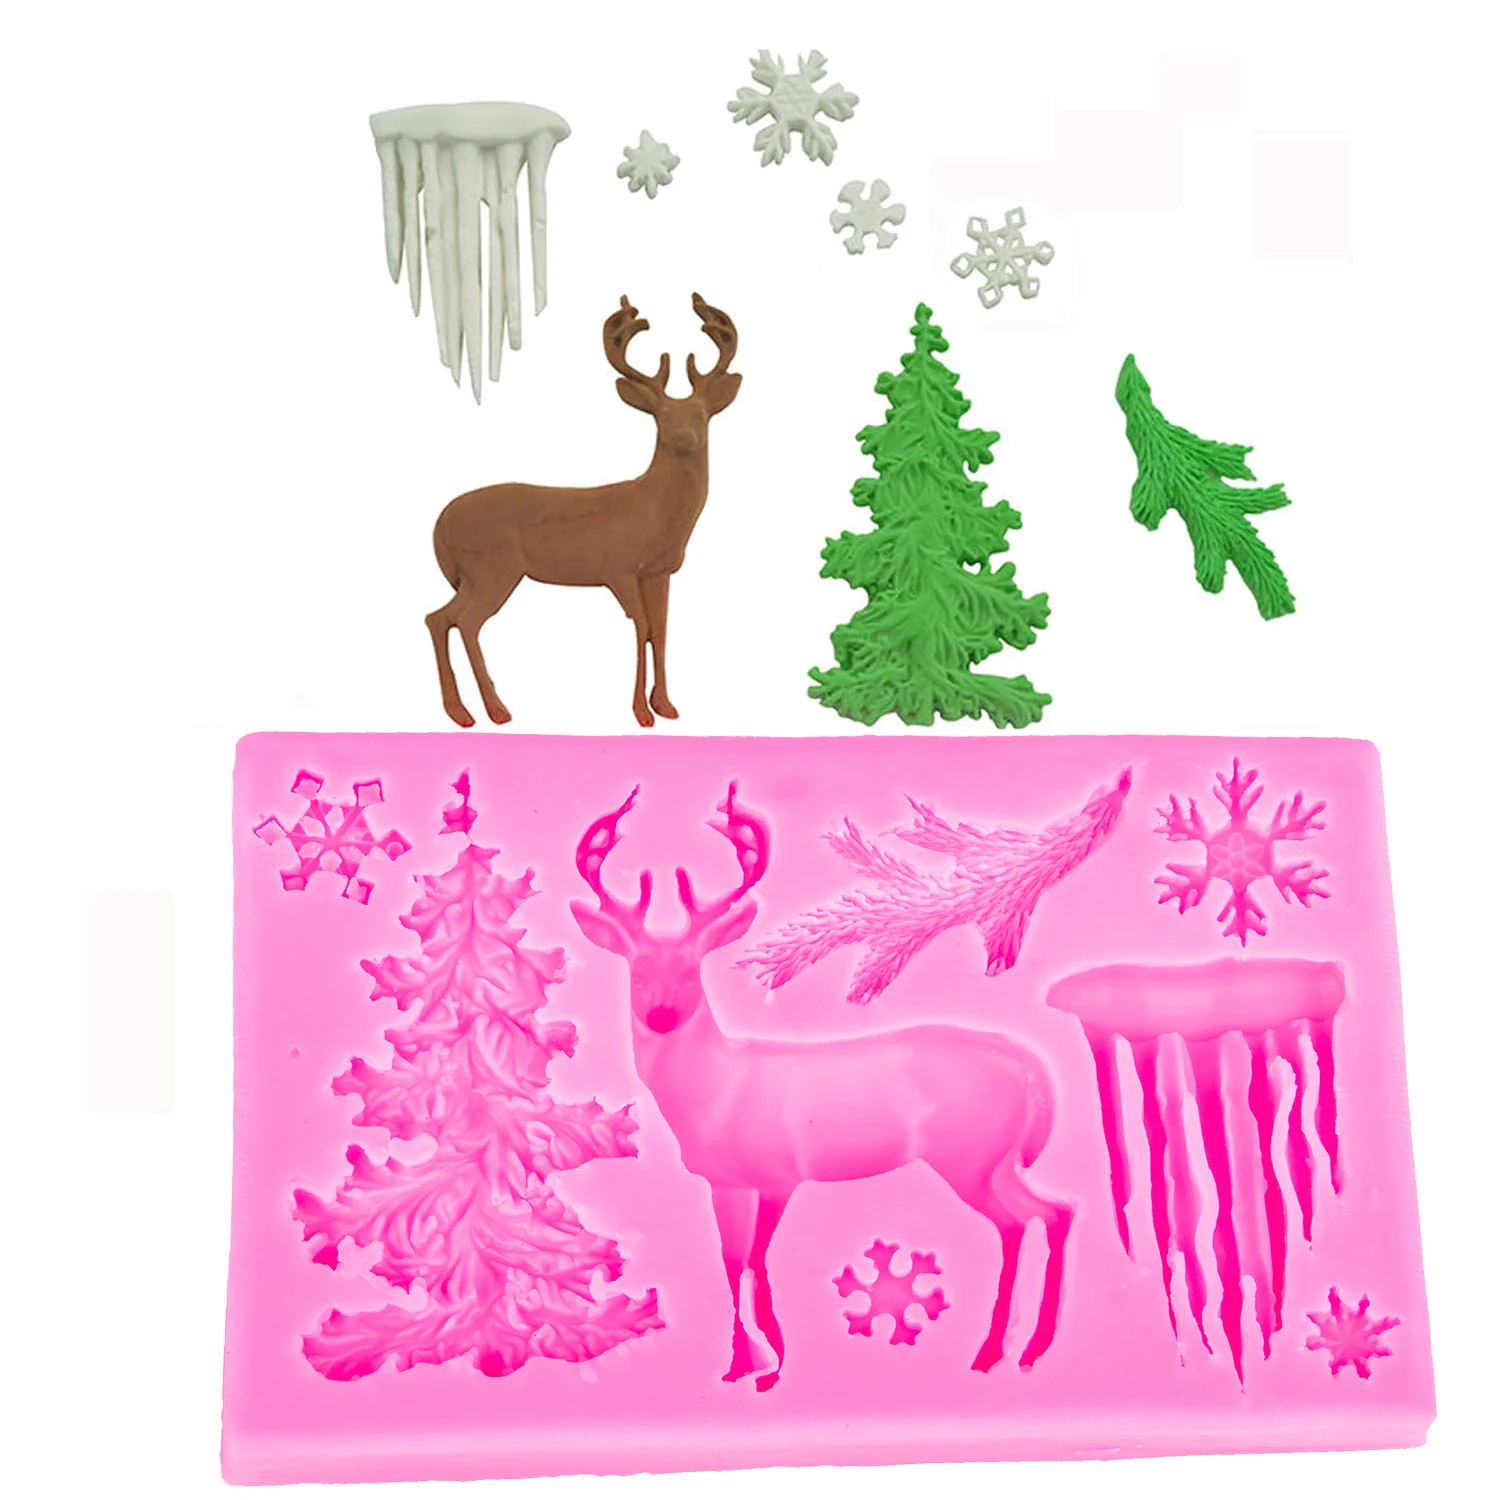 

Christmas snowflake deer 3D Reverse sugar Molding fondant cake silicone mold for polymer chocolate pastry decoration tools F1149